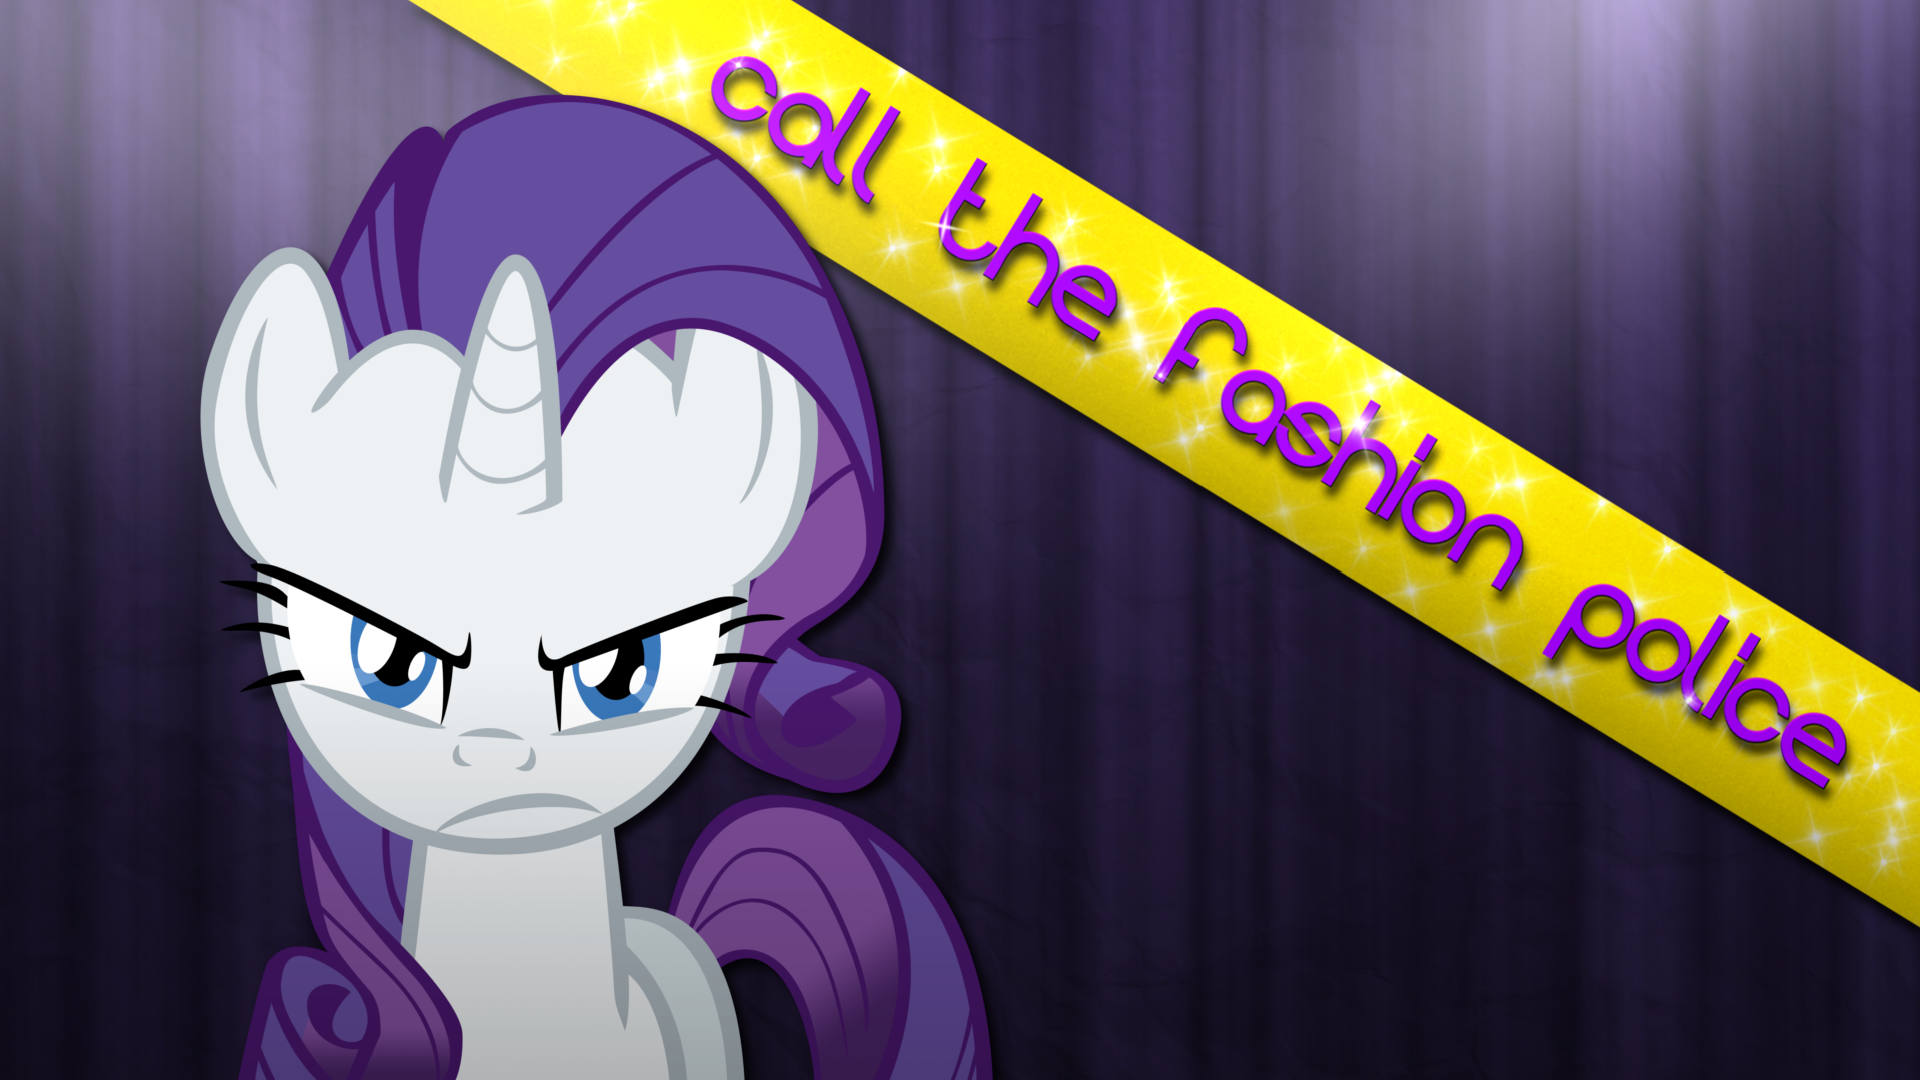 Rarity: Call the fashion police - Wallpaper by Tadashi--kun and TheFlutterKnight